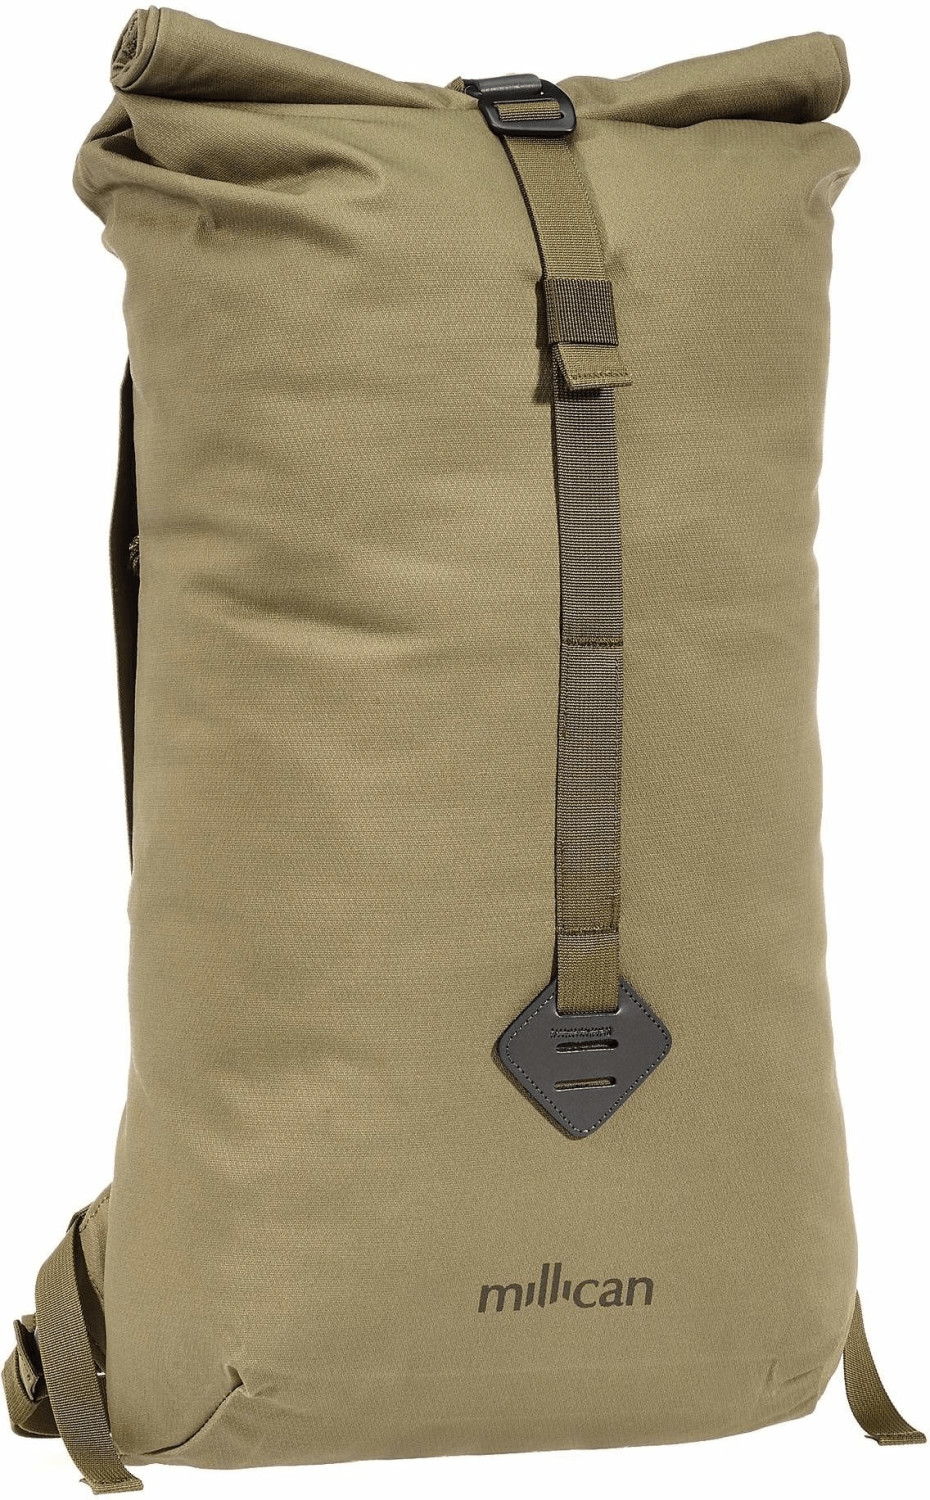 Buy Millican Smith The Roll Pack 18L moss from £93.74 (Today) Best Deals on idealo.co.uk